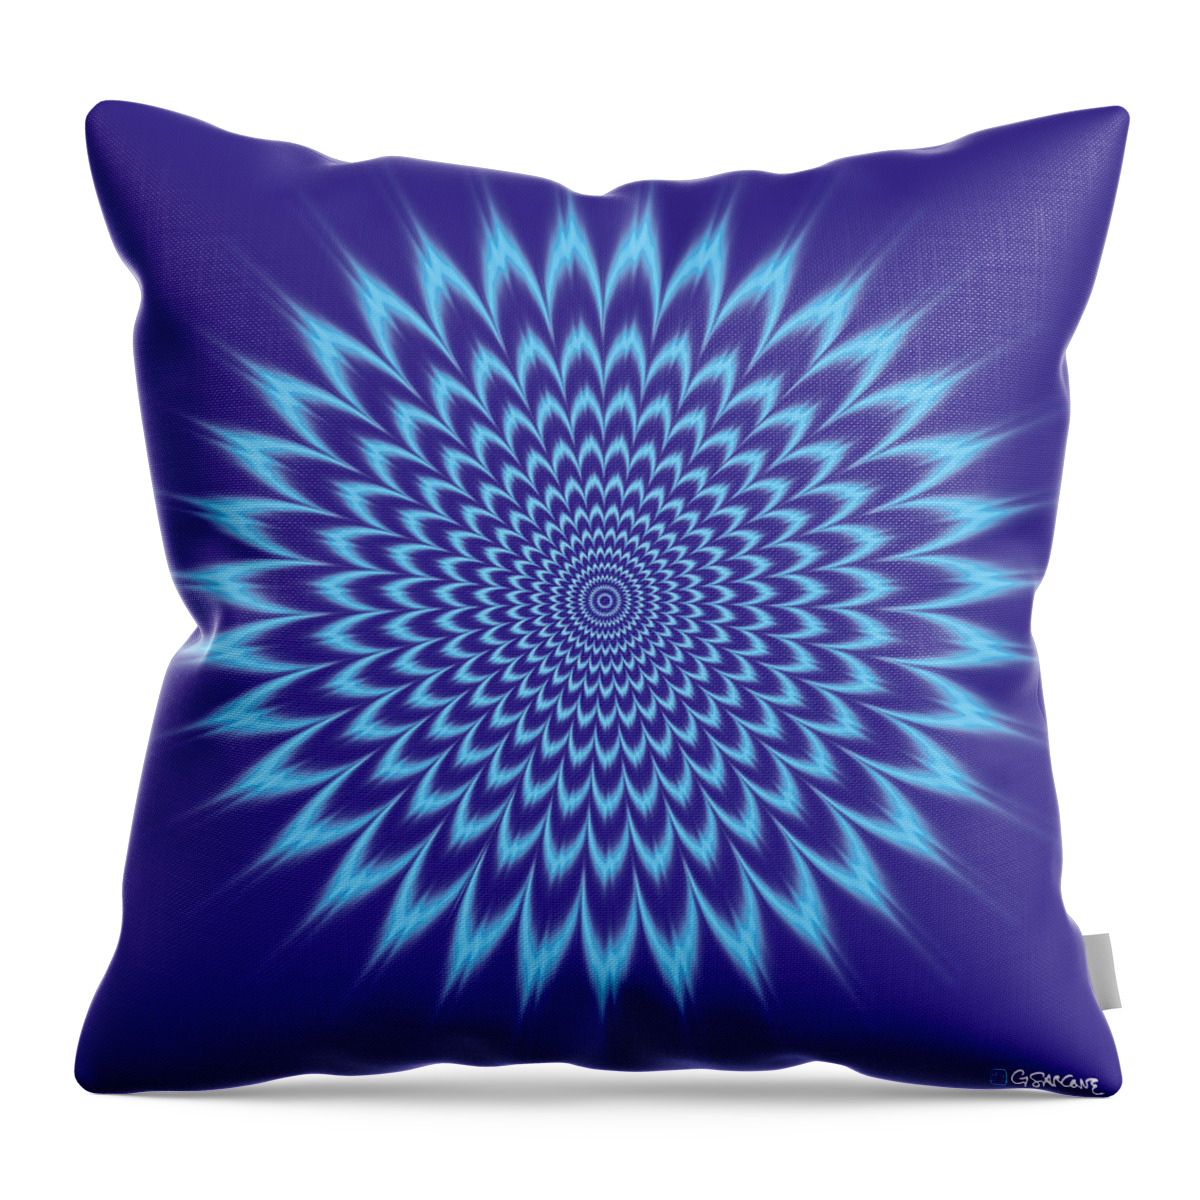 Vibrating Throw Pillow featuring the digital art Vibrating colors by Gianni Sarcone